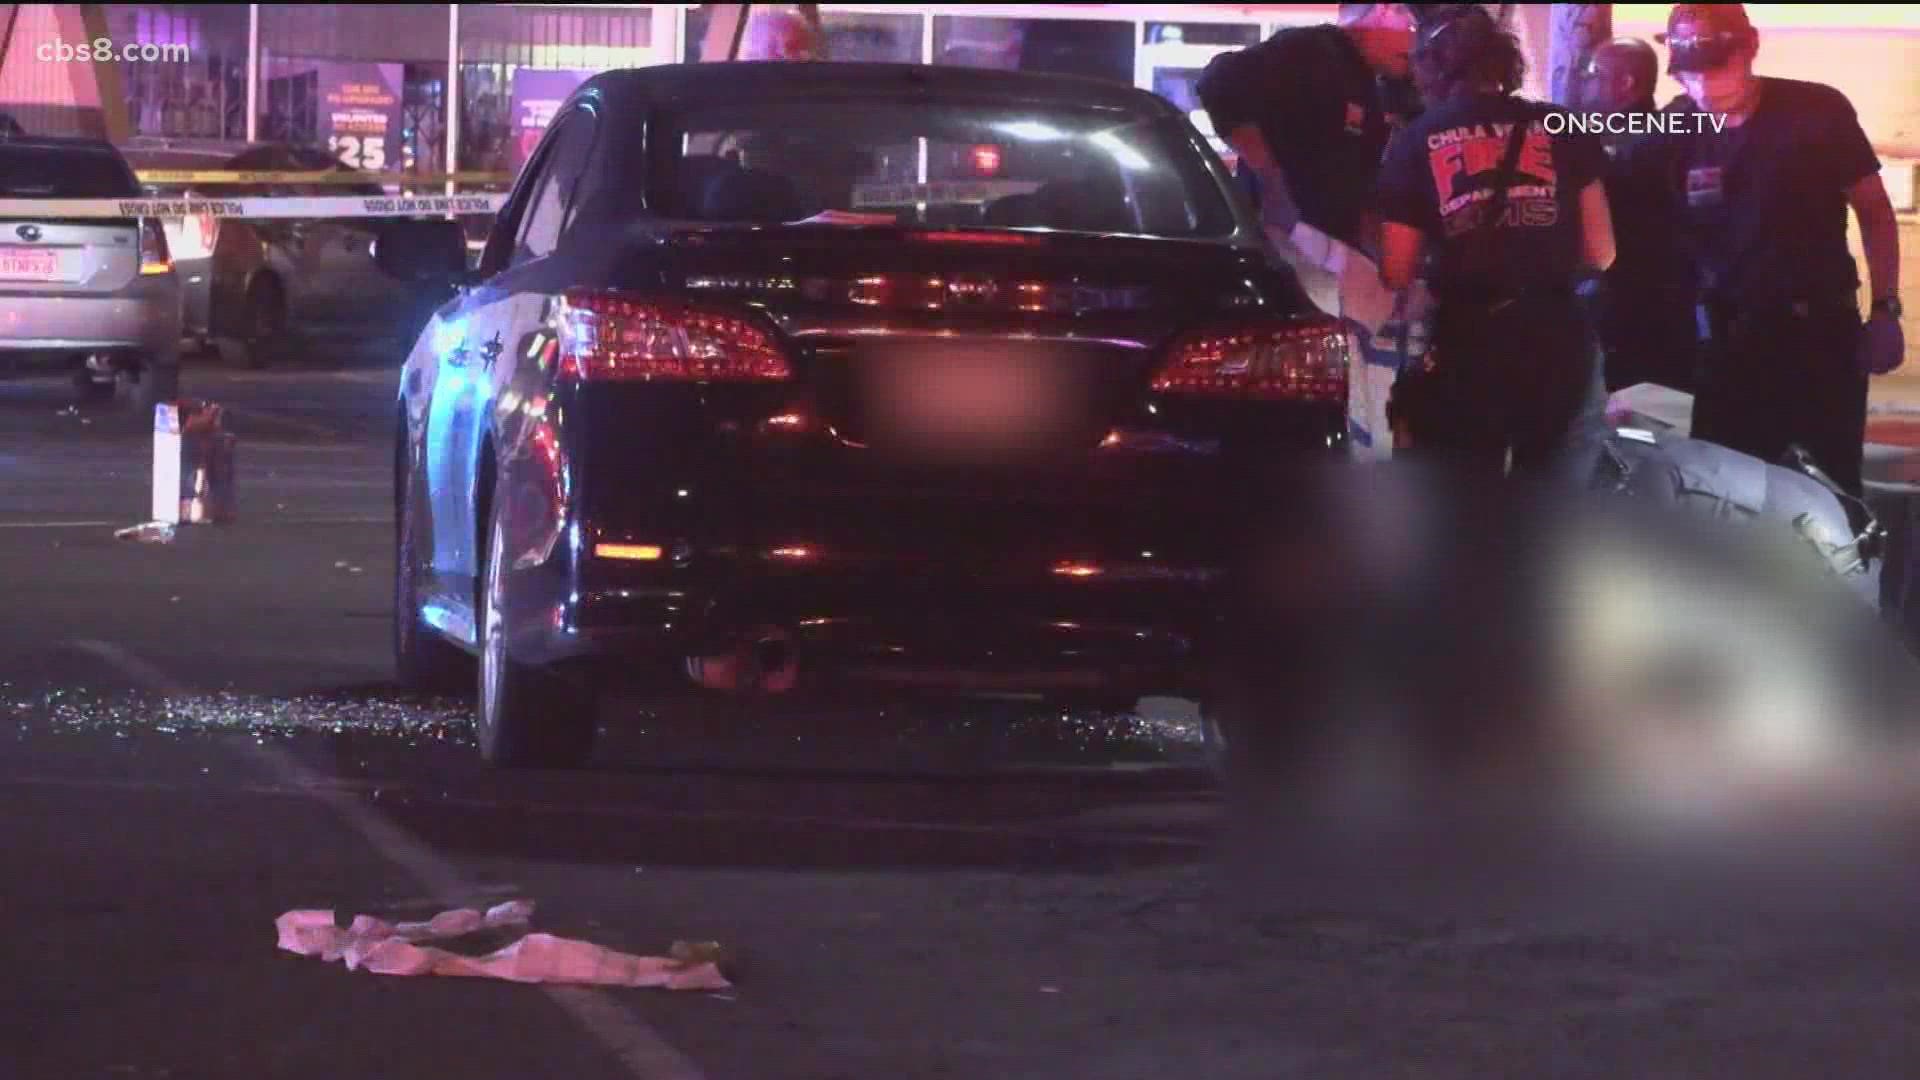 A 41-year-old man was shot to death and a teenager was wounded Saturday outside a bar.